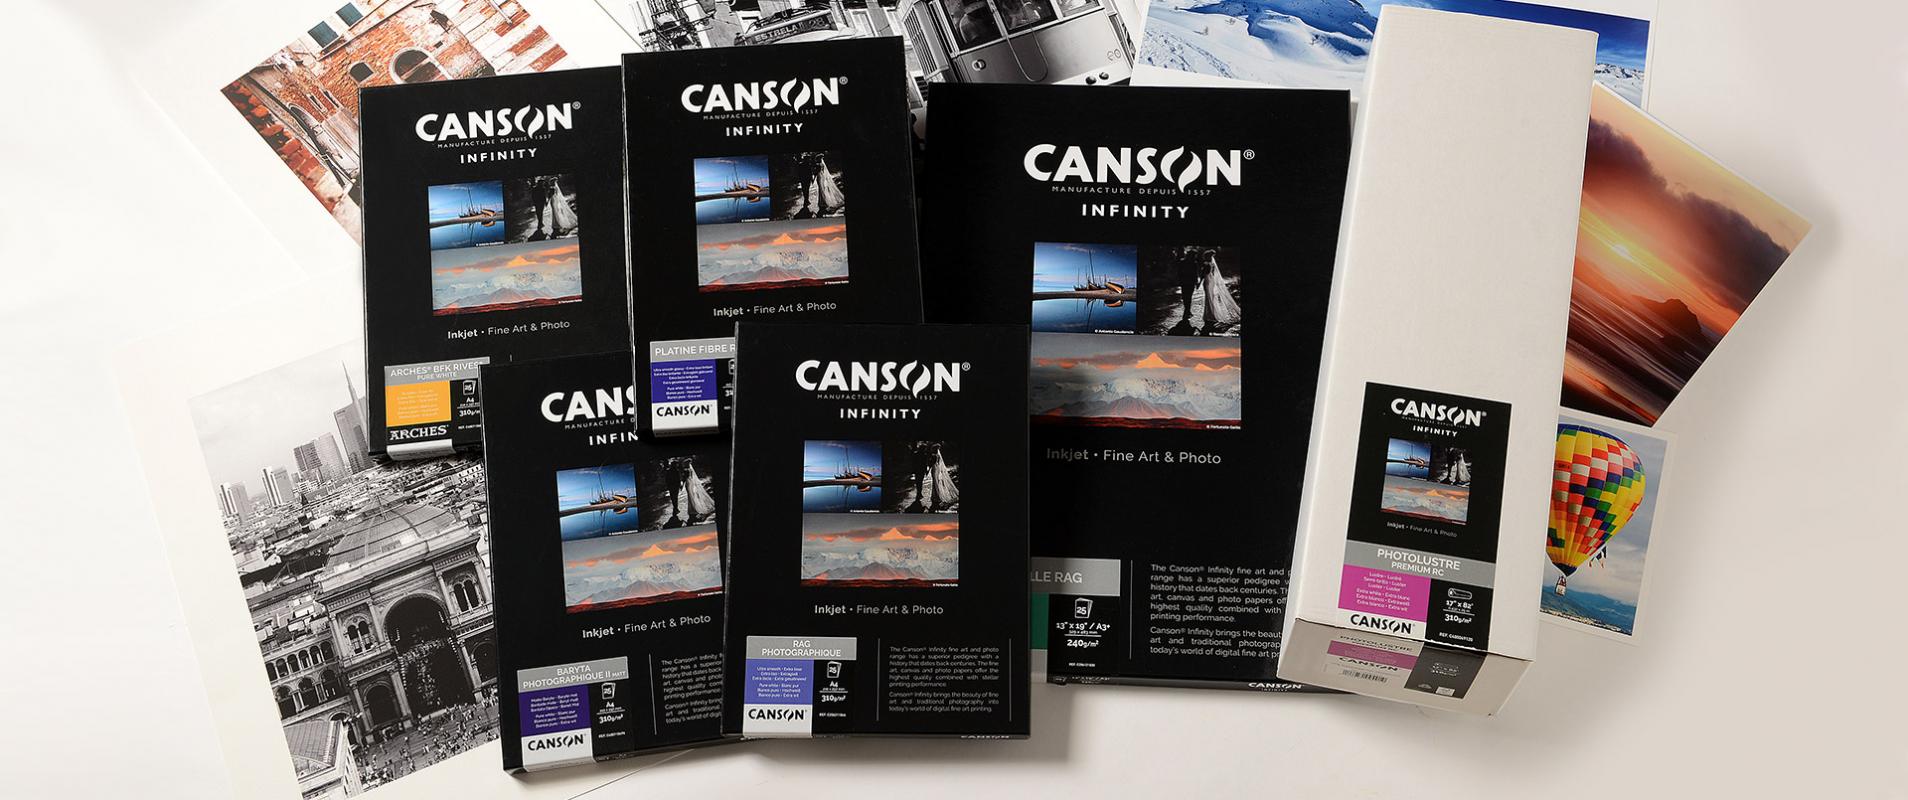 Canson® Infinity - Digital & Technical | Canson